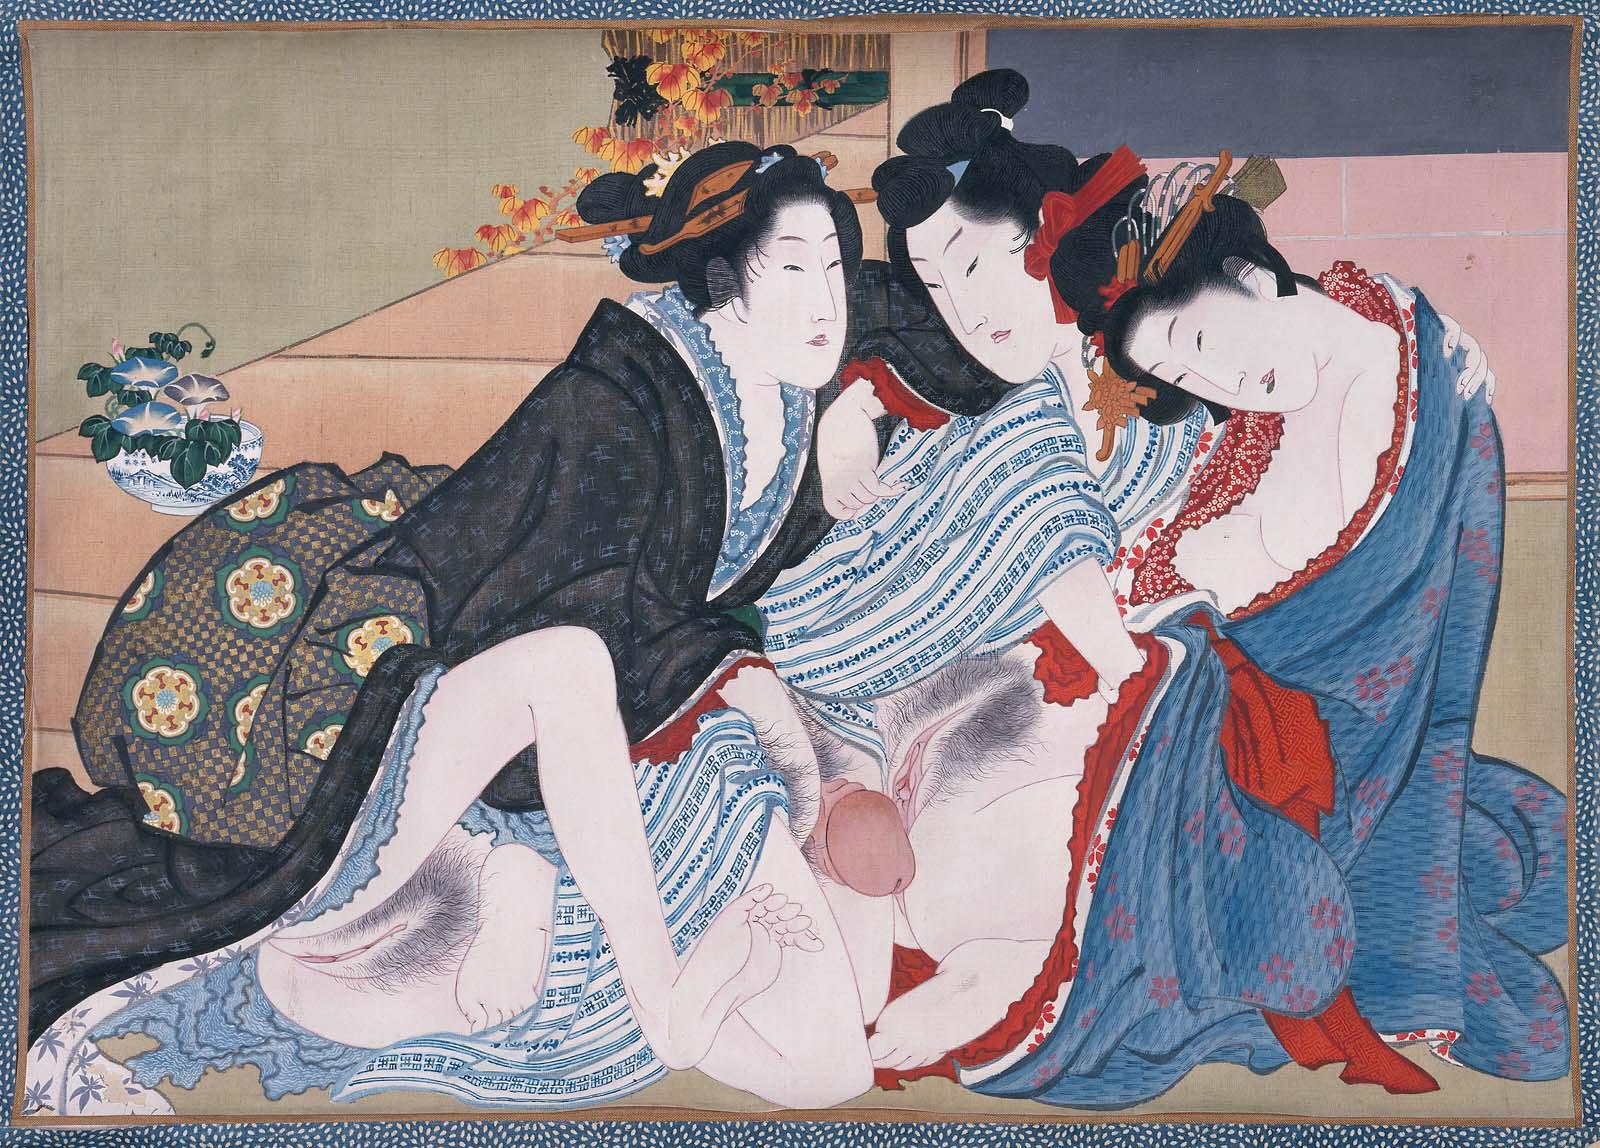 Two men and a woman making love